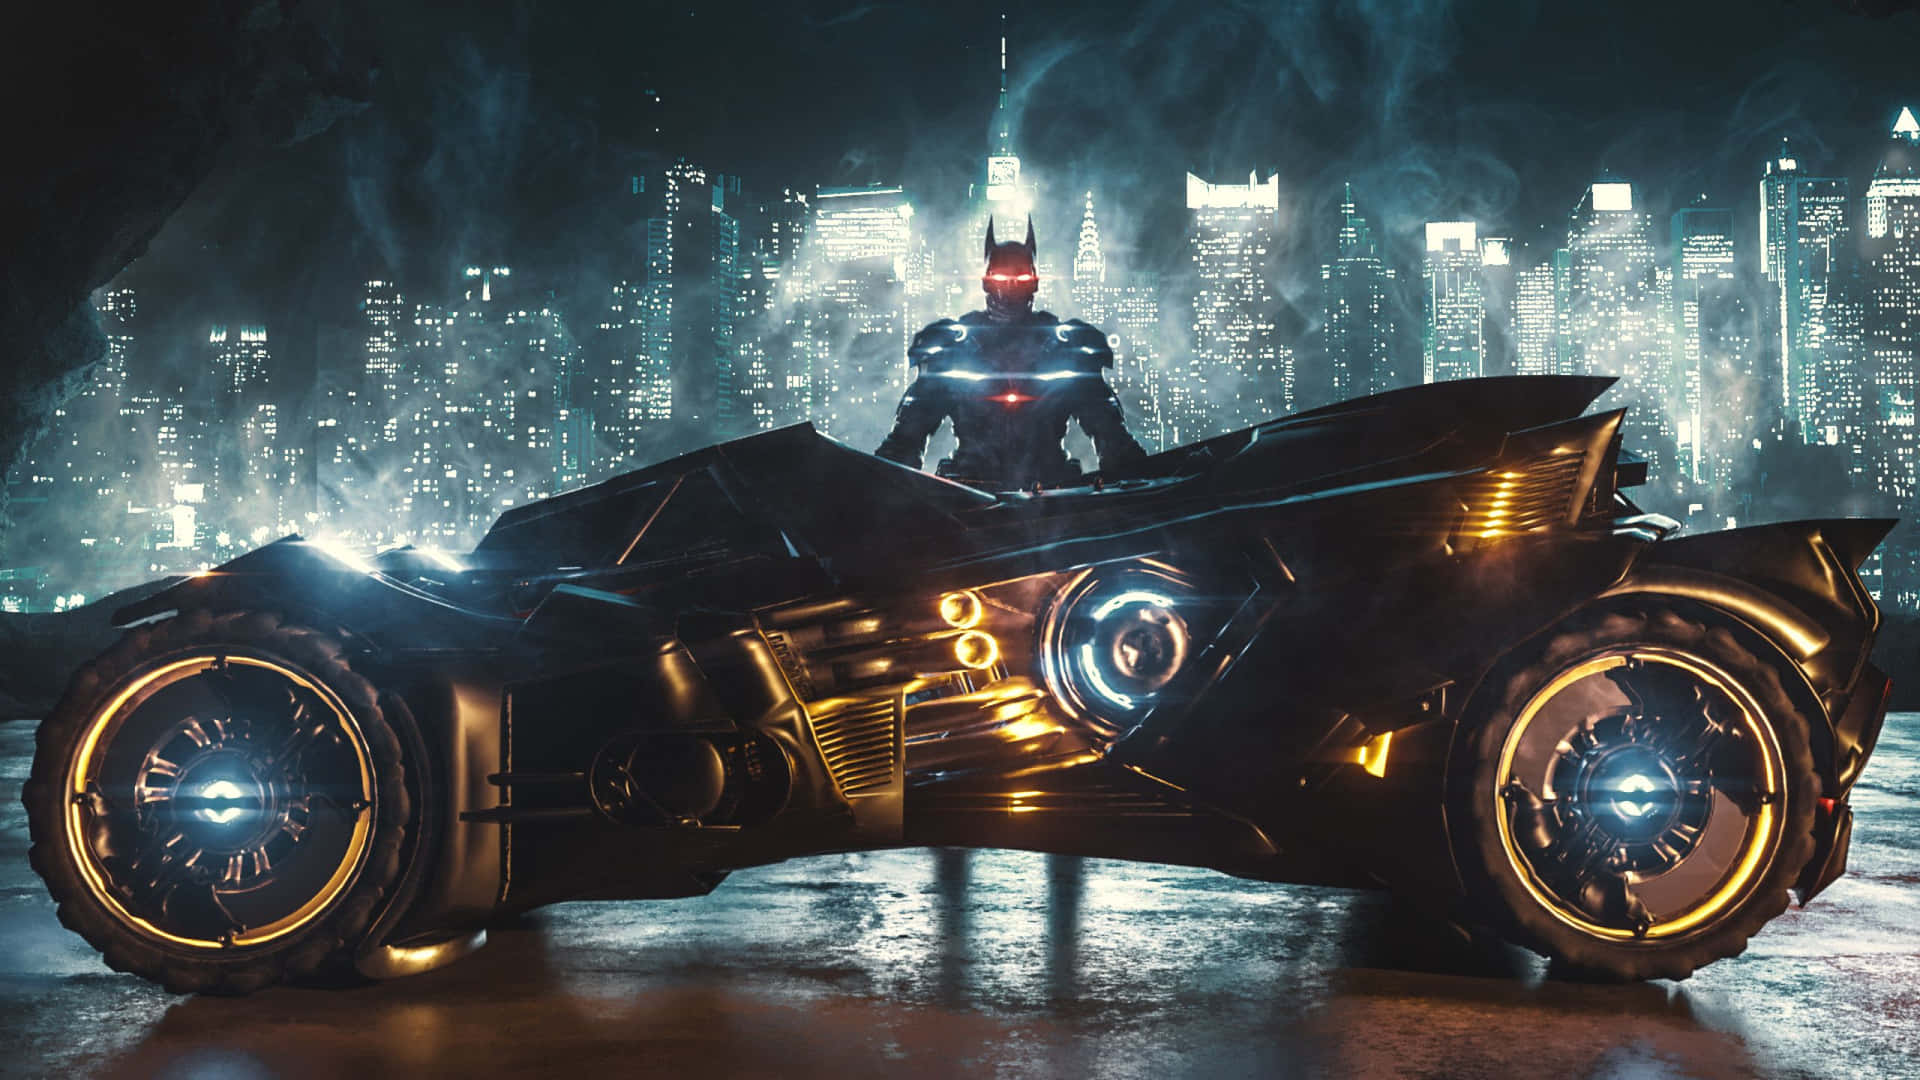 Get ready to fight crime in the most iconic car ever — the Batmobile. Wallpaper